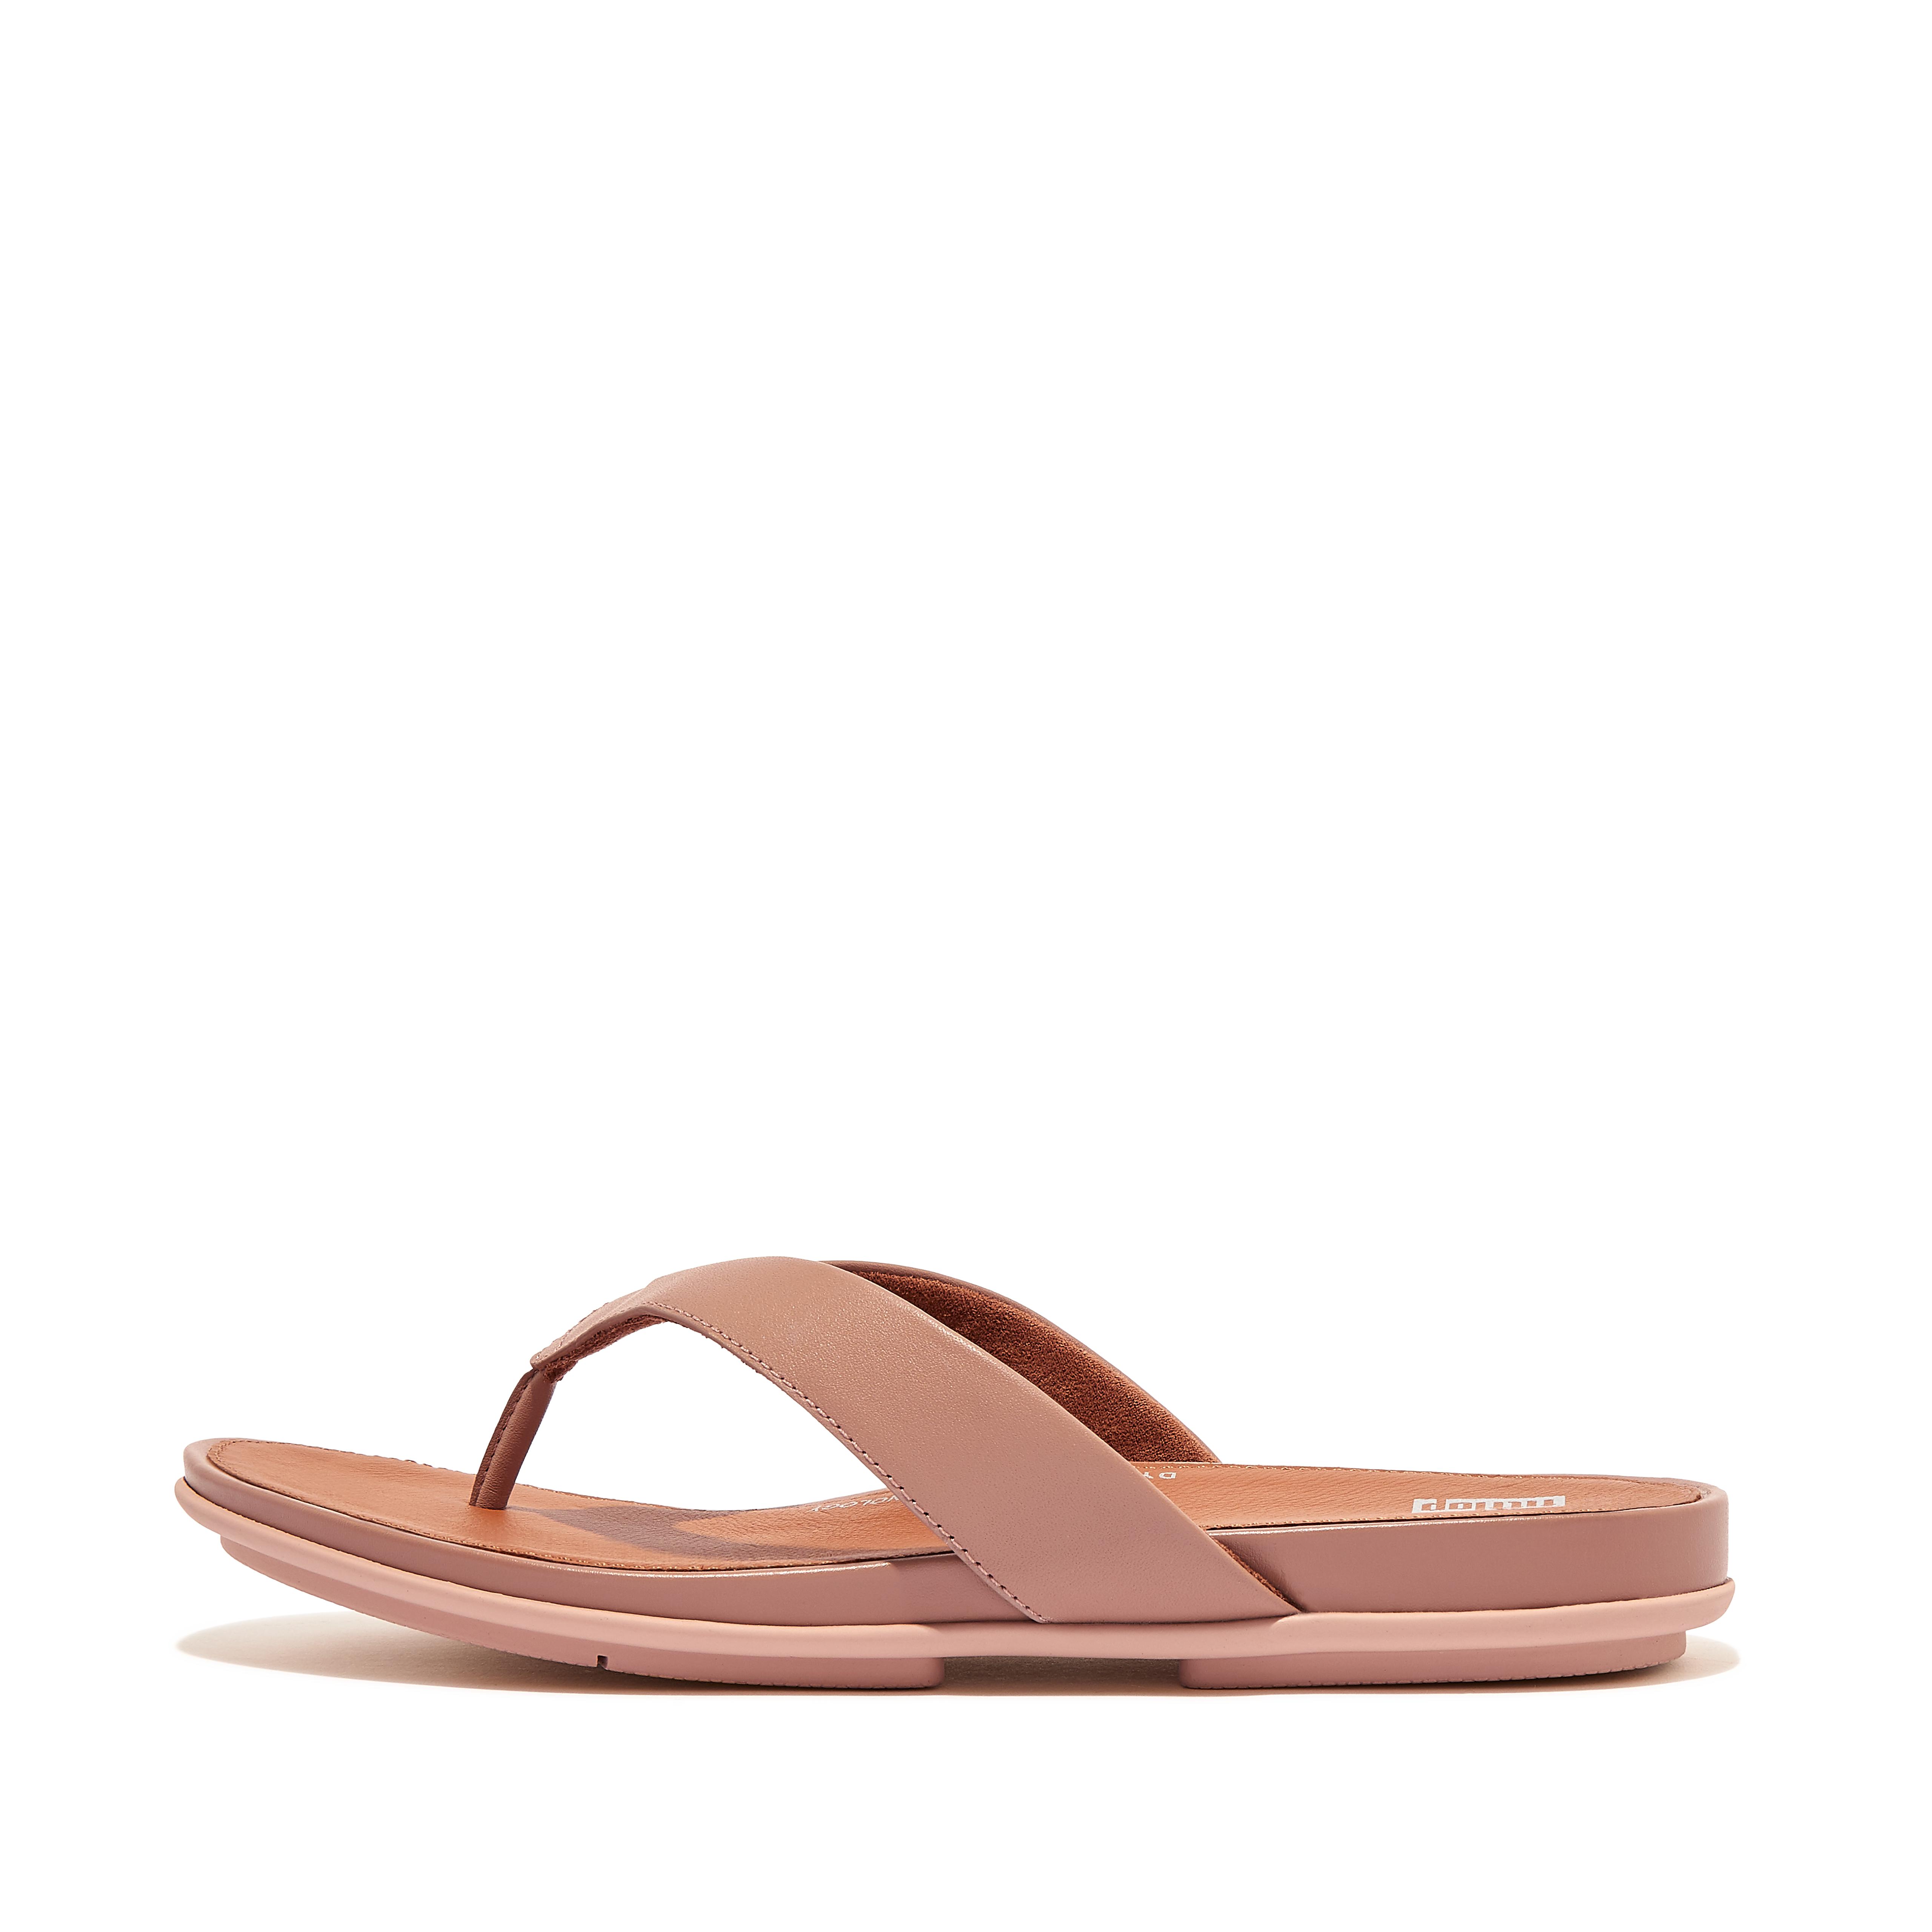 Fitflop Leather Flip-Flops,Soft Pink